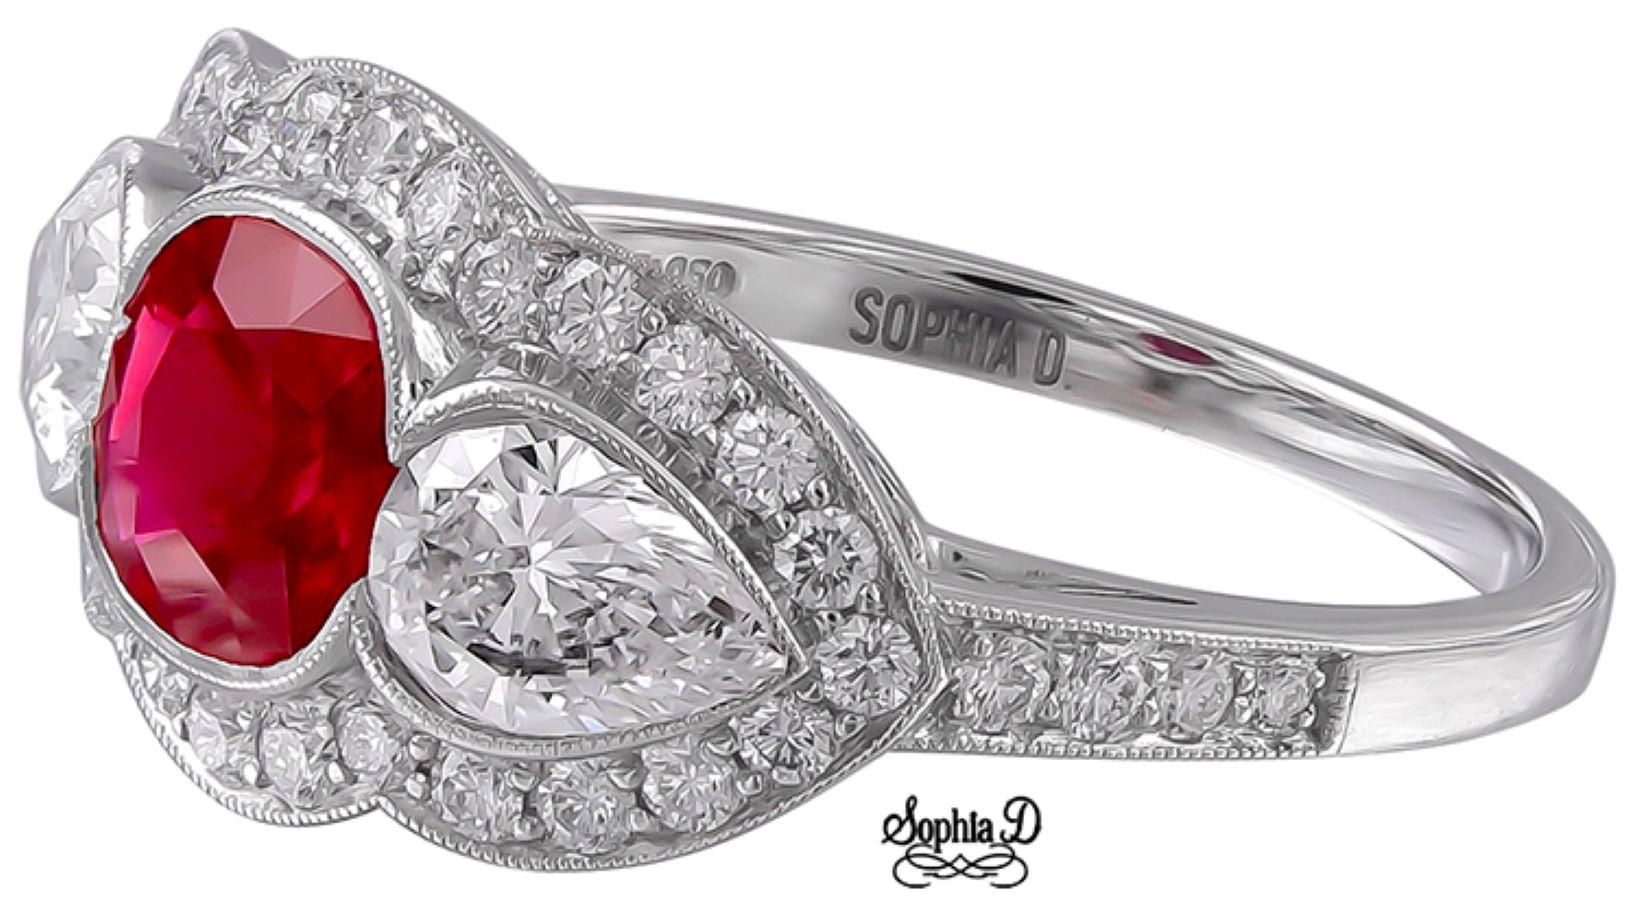 A three stone ring with 0.92 carat cushion cut center ruby flanked with 1.03 carat pear shaped diamond and accentuated with 0.43 carat small diamonds set in platinum.

Sophia D by Joseph Dardashti LTD has been known worldwide for 35 years and are